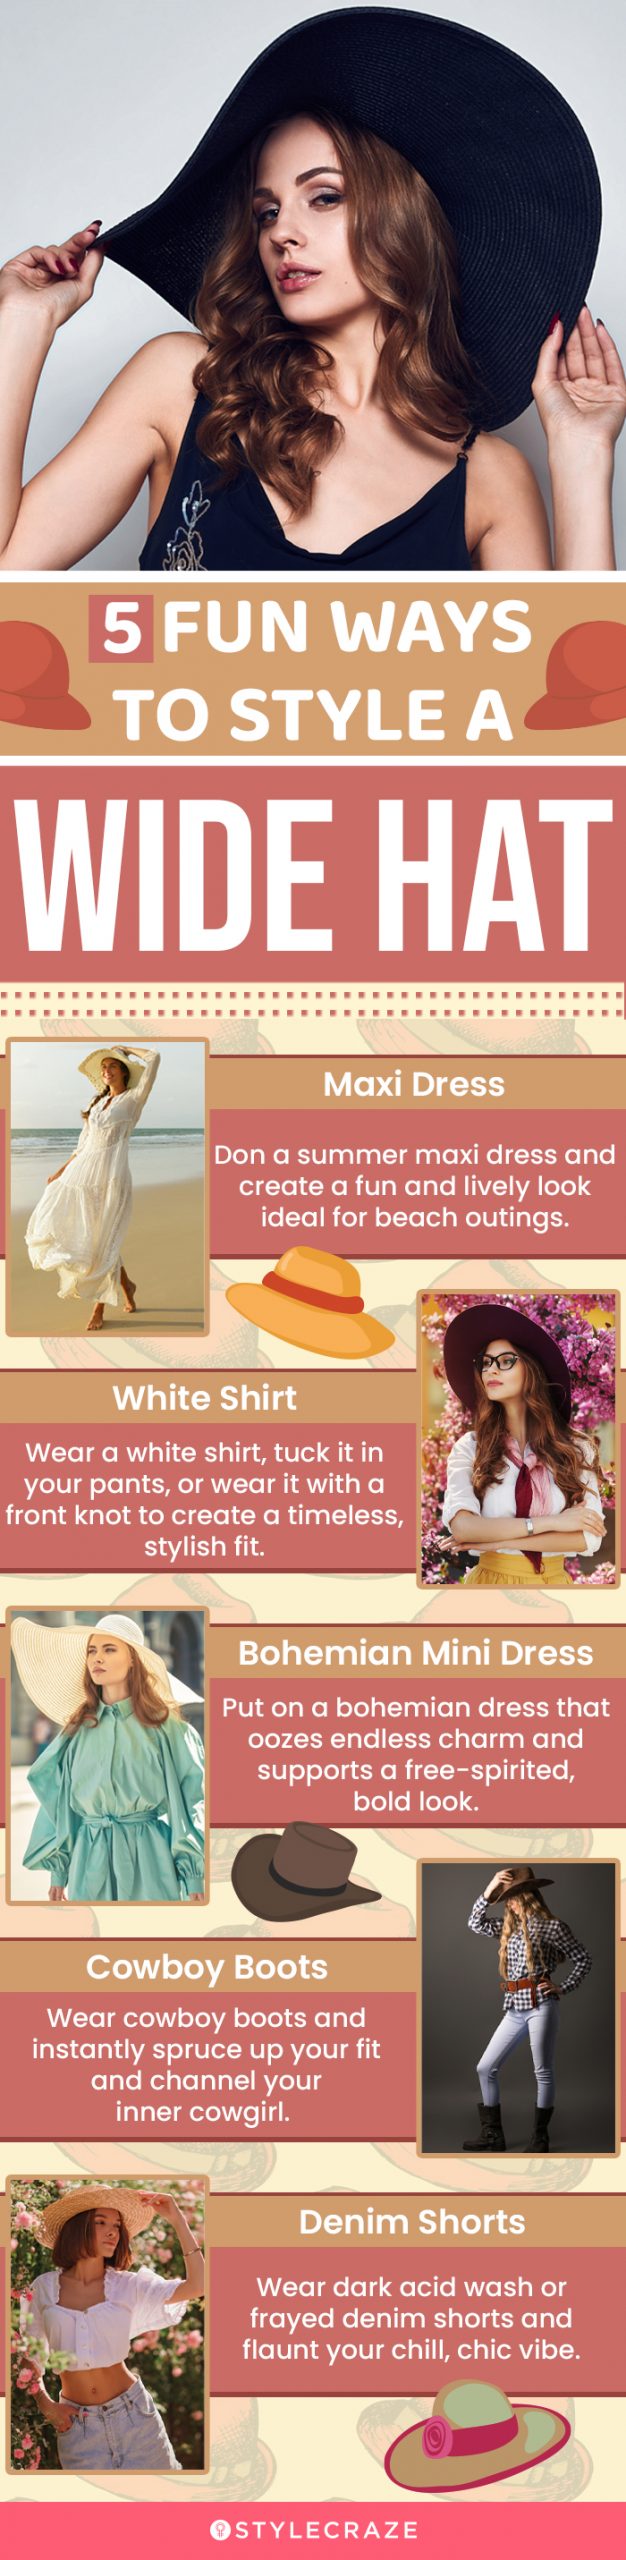 5 Fun Ways To Style A Wide Hat (infographic)